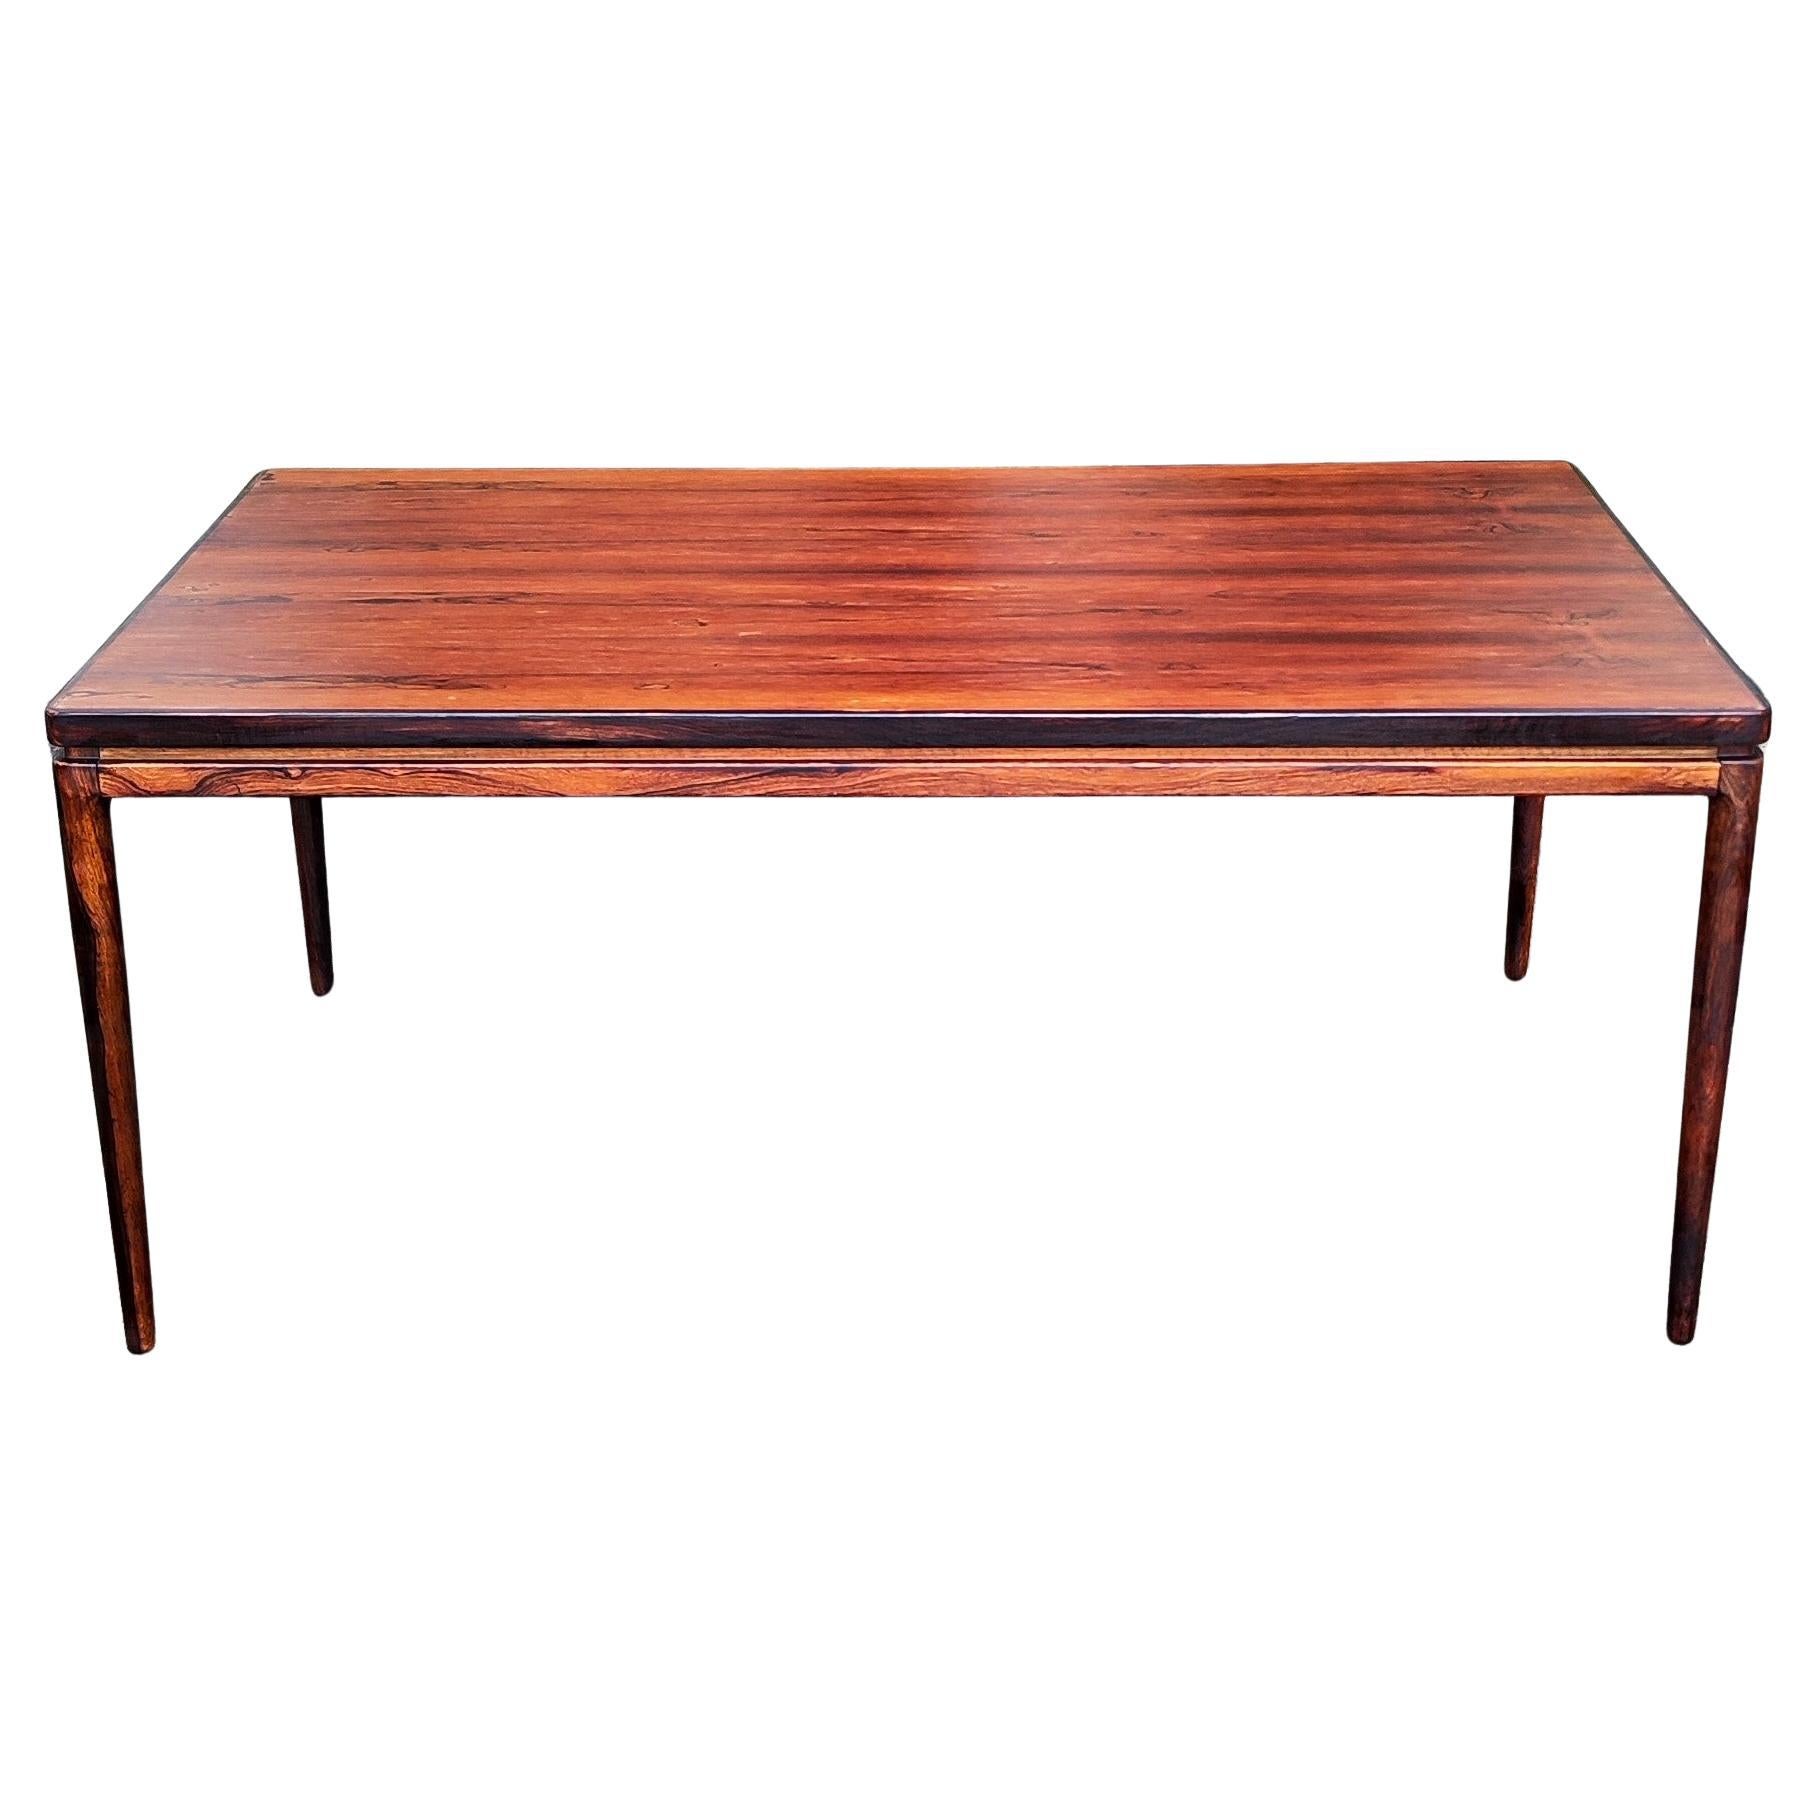 Wood dining table from the 60s - Johannes Andersen - Danish design